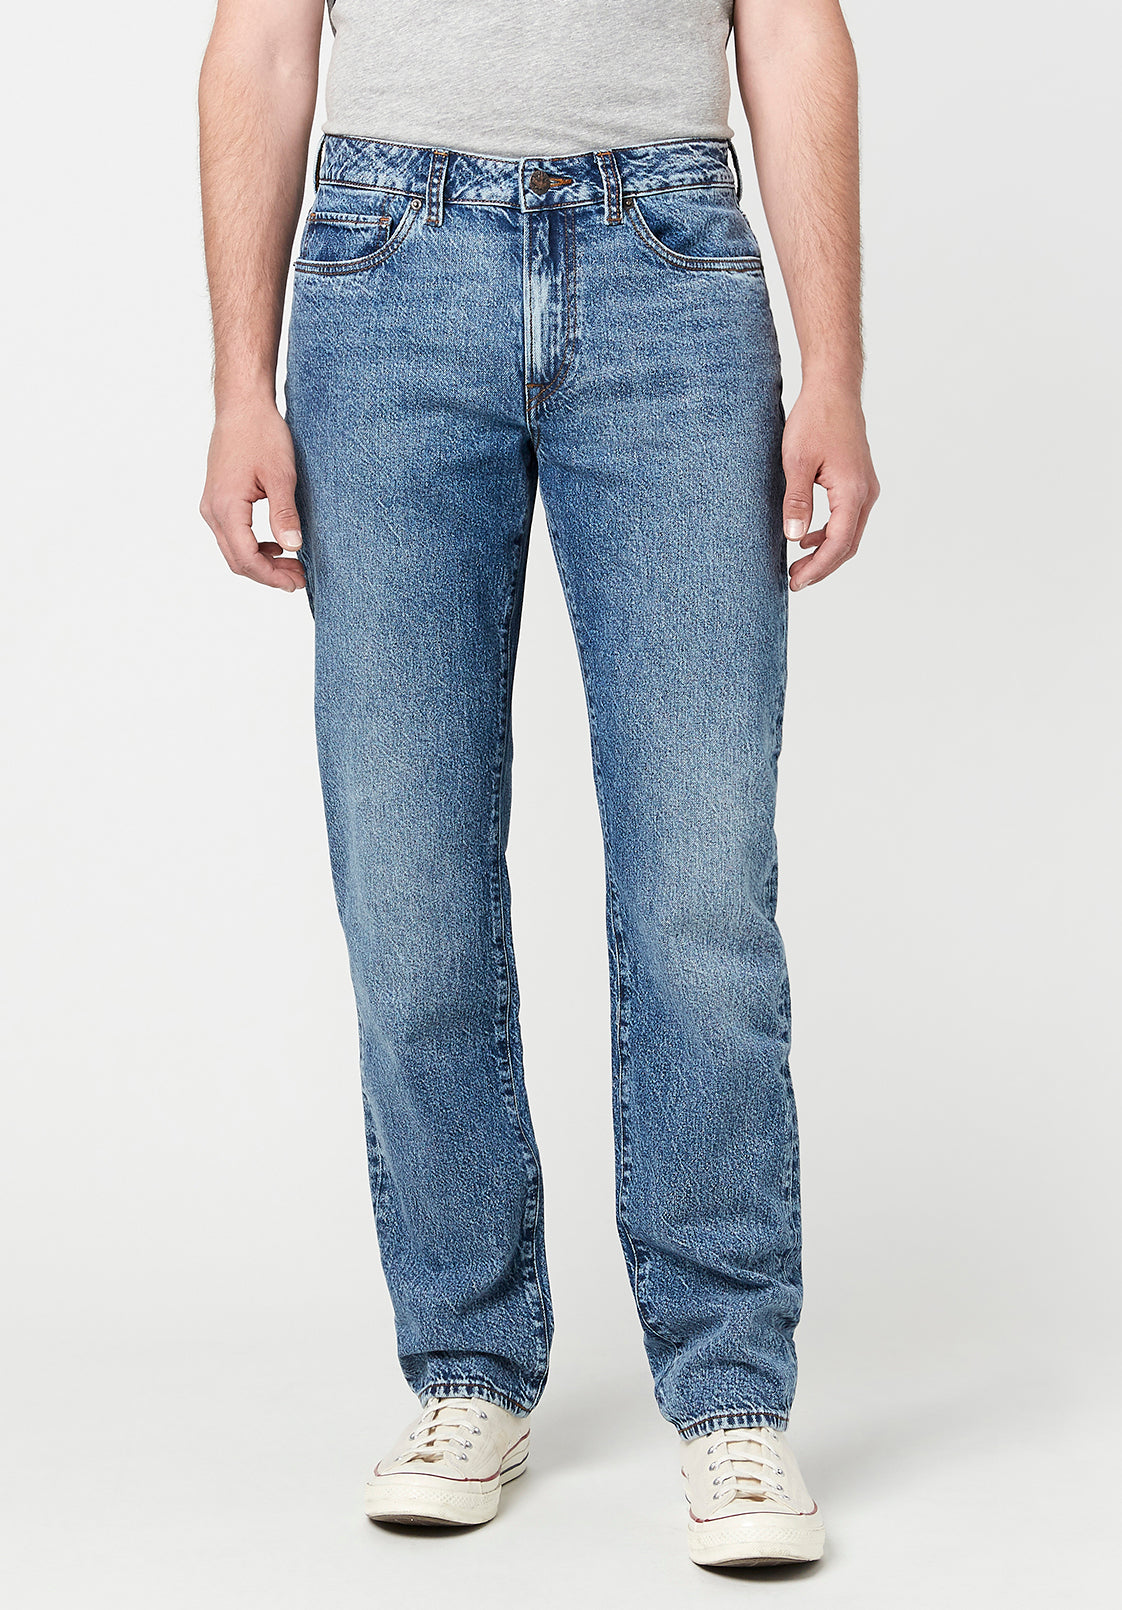 Relax Fit Jeans For Men | Men's Relaxed Ben Jeans | Buffalo Jeans ...